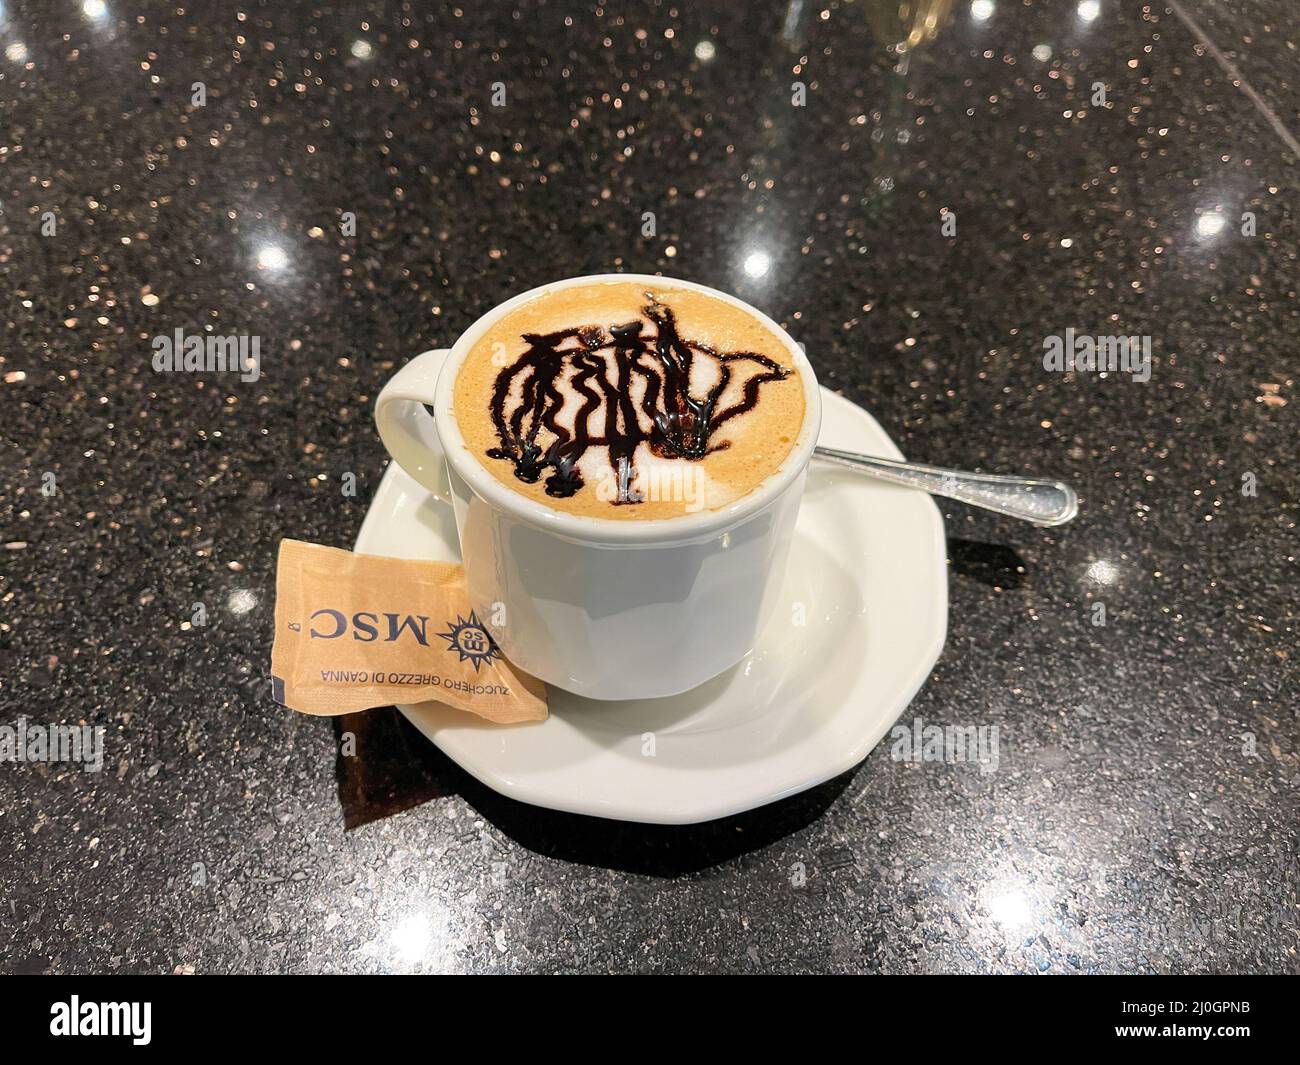 orlando, FL USA - October 11, 2021:  A delicious chocolate latte served on the MSC Cruise Ship Divina in Port Canaveral, Florida., Stock Photo